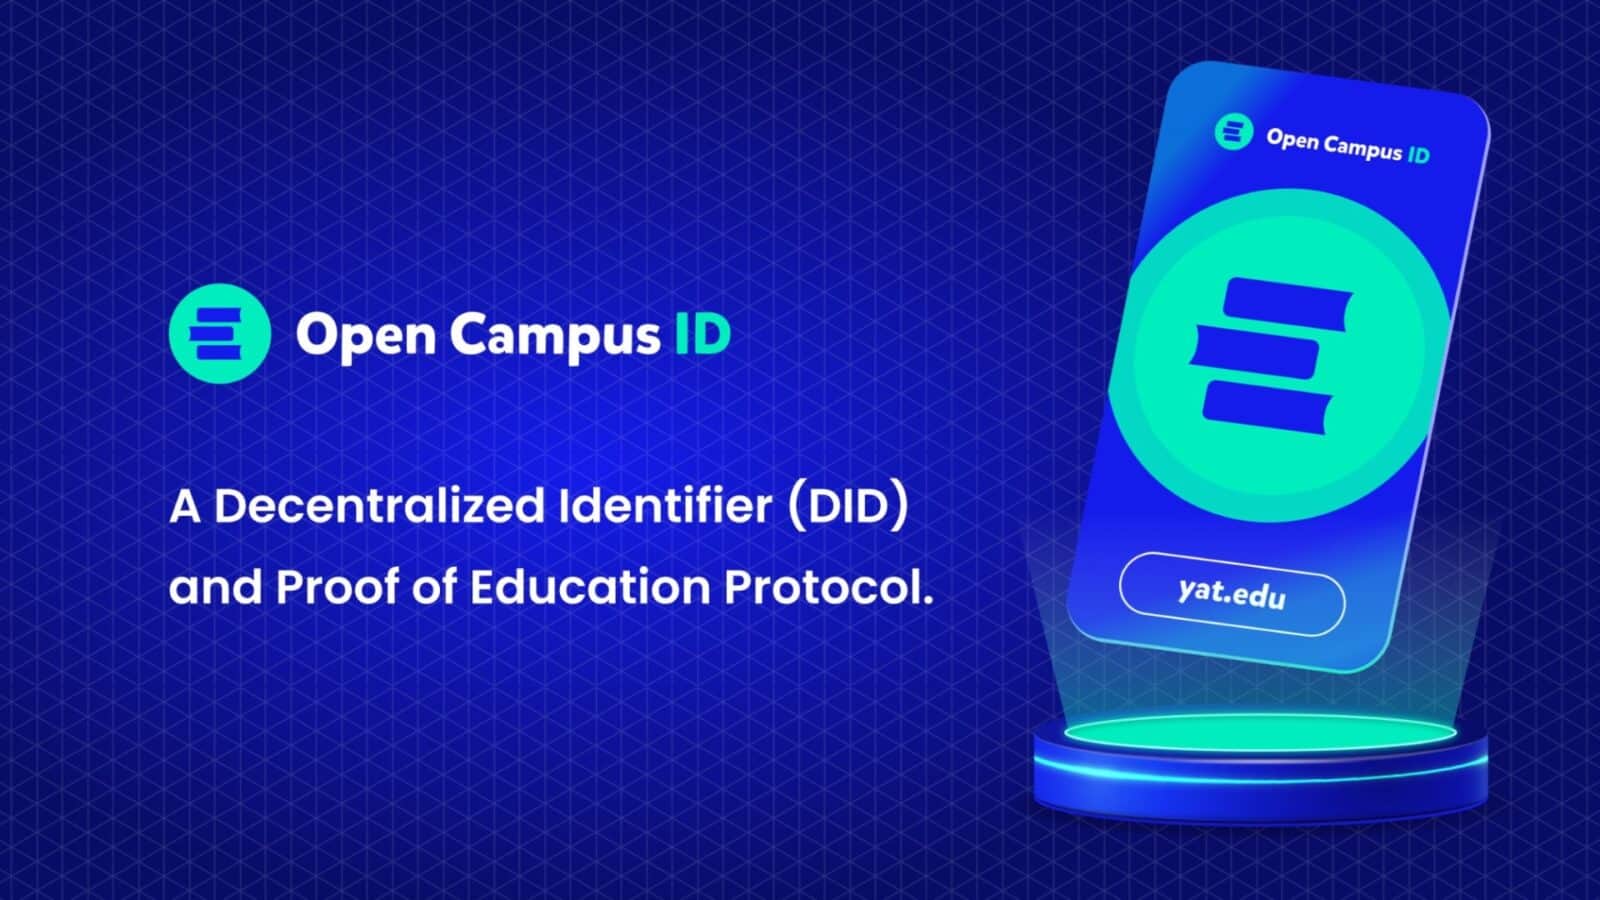 Open Campus Revolutionizes Education with M Fund and Innovative ID System